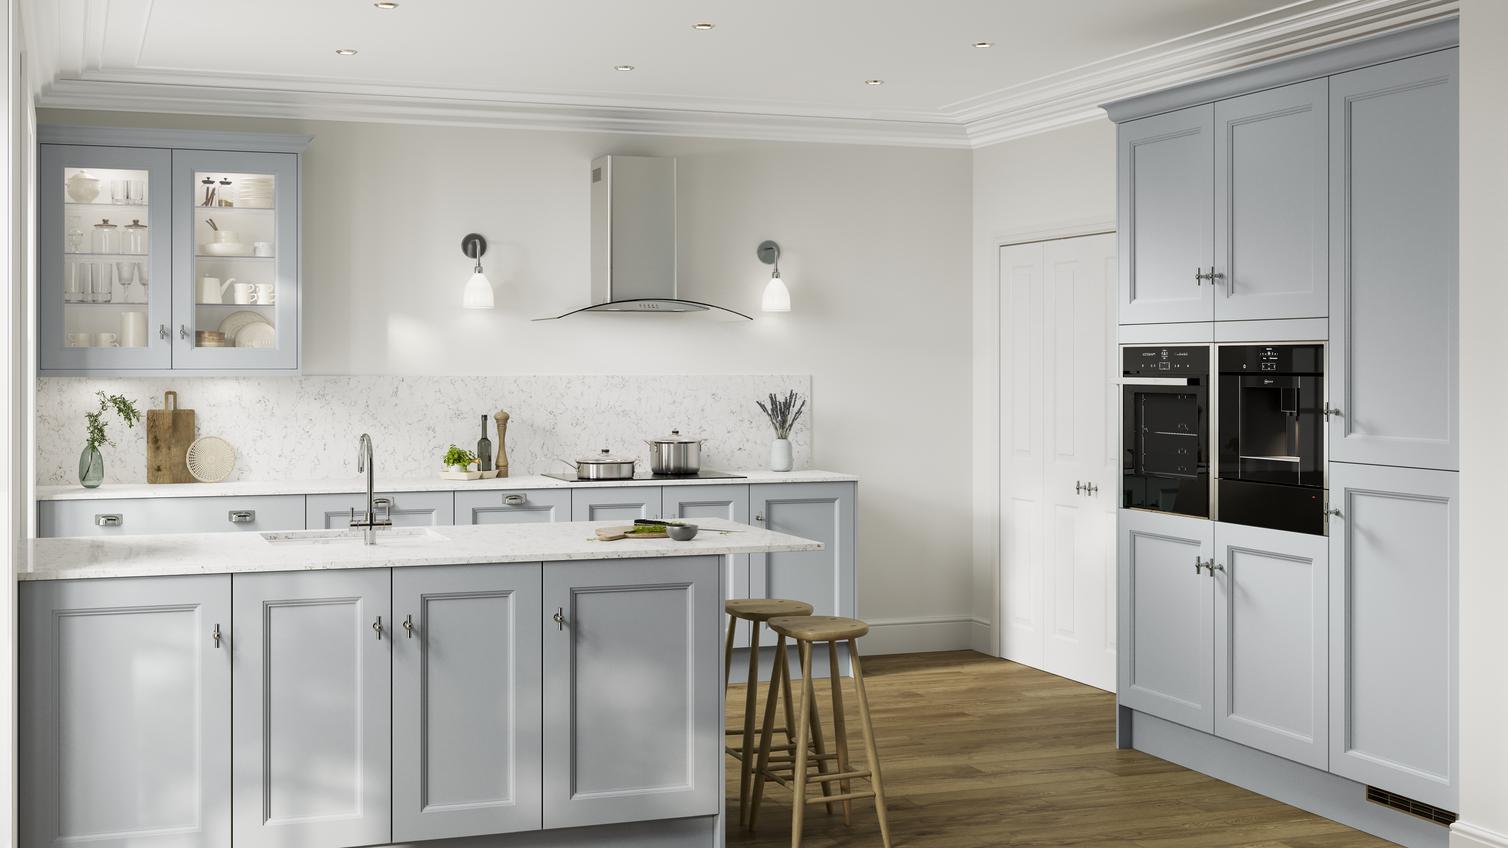 A peninsular kitchen, in a mist blue colour and shaker design. It has white worktops, black appliances, and glass wall units